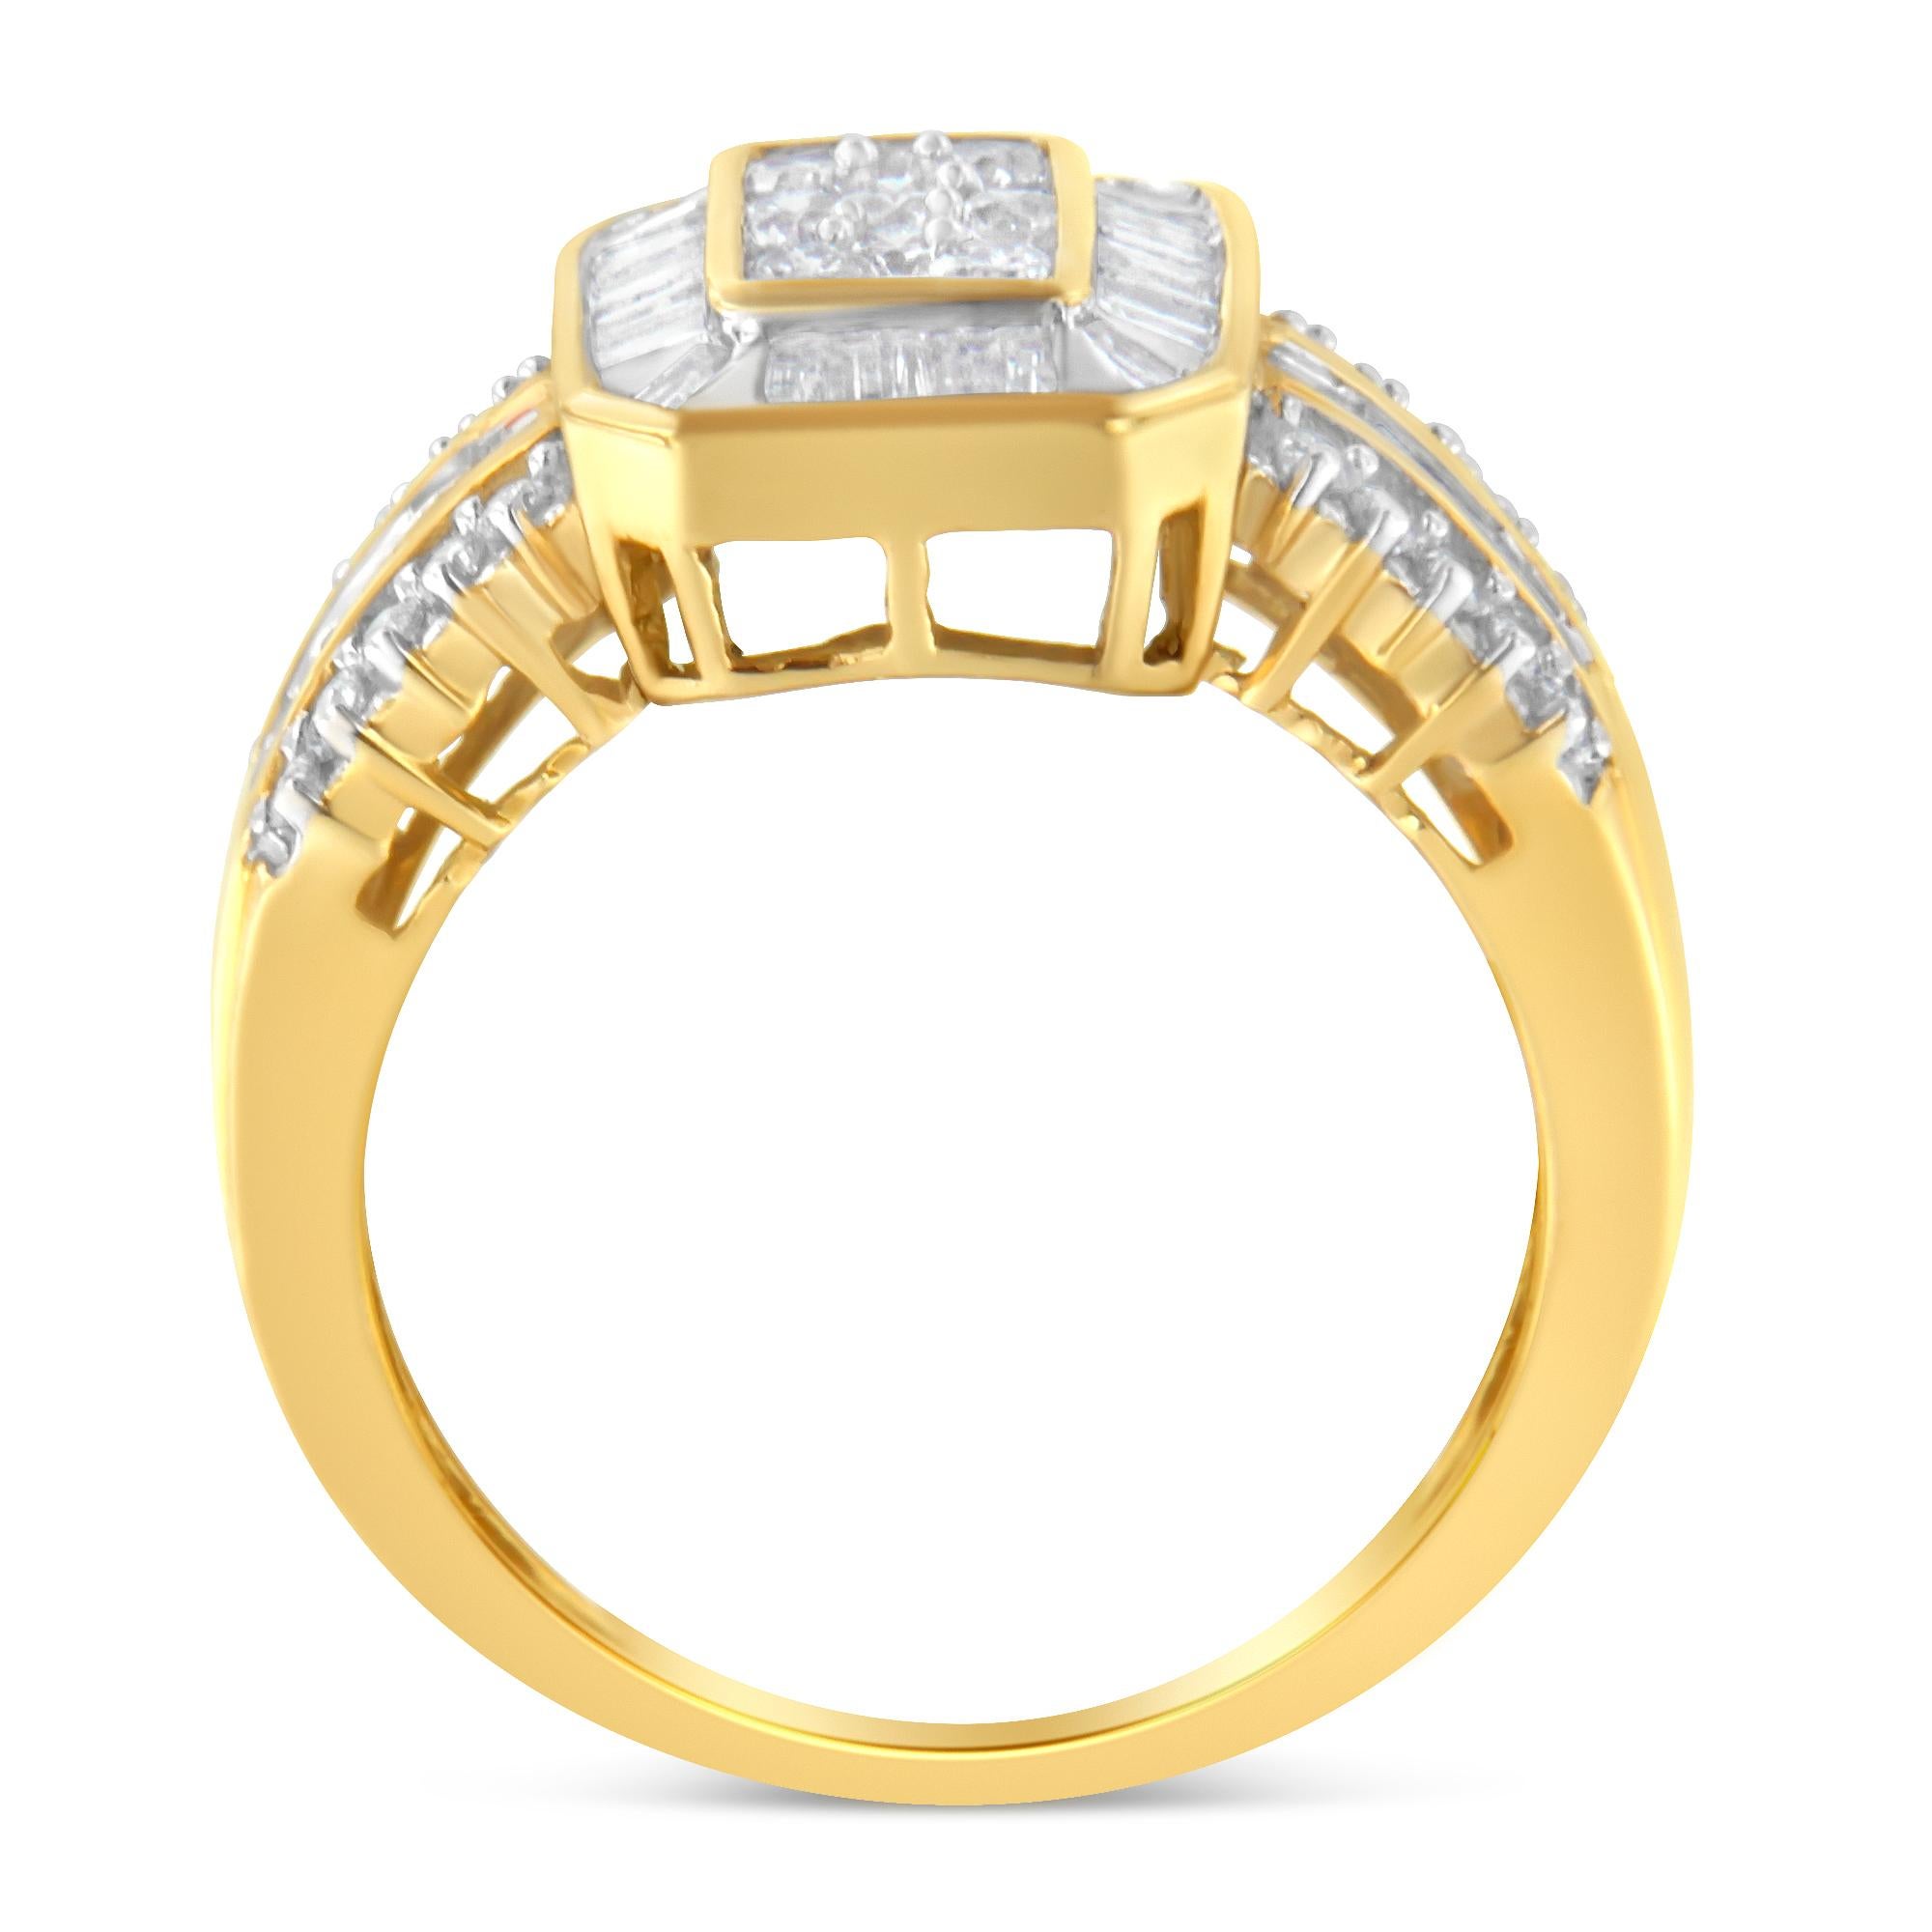 For Sale:  10K Yellow Gold 1.0 Carat Diamond Cocktail Ring 2